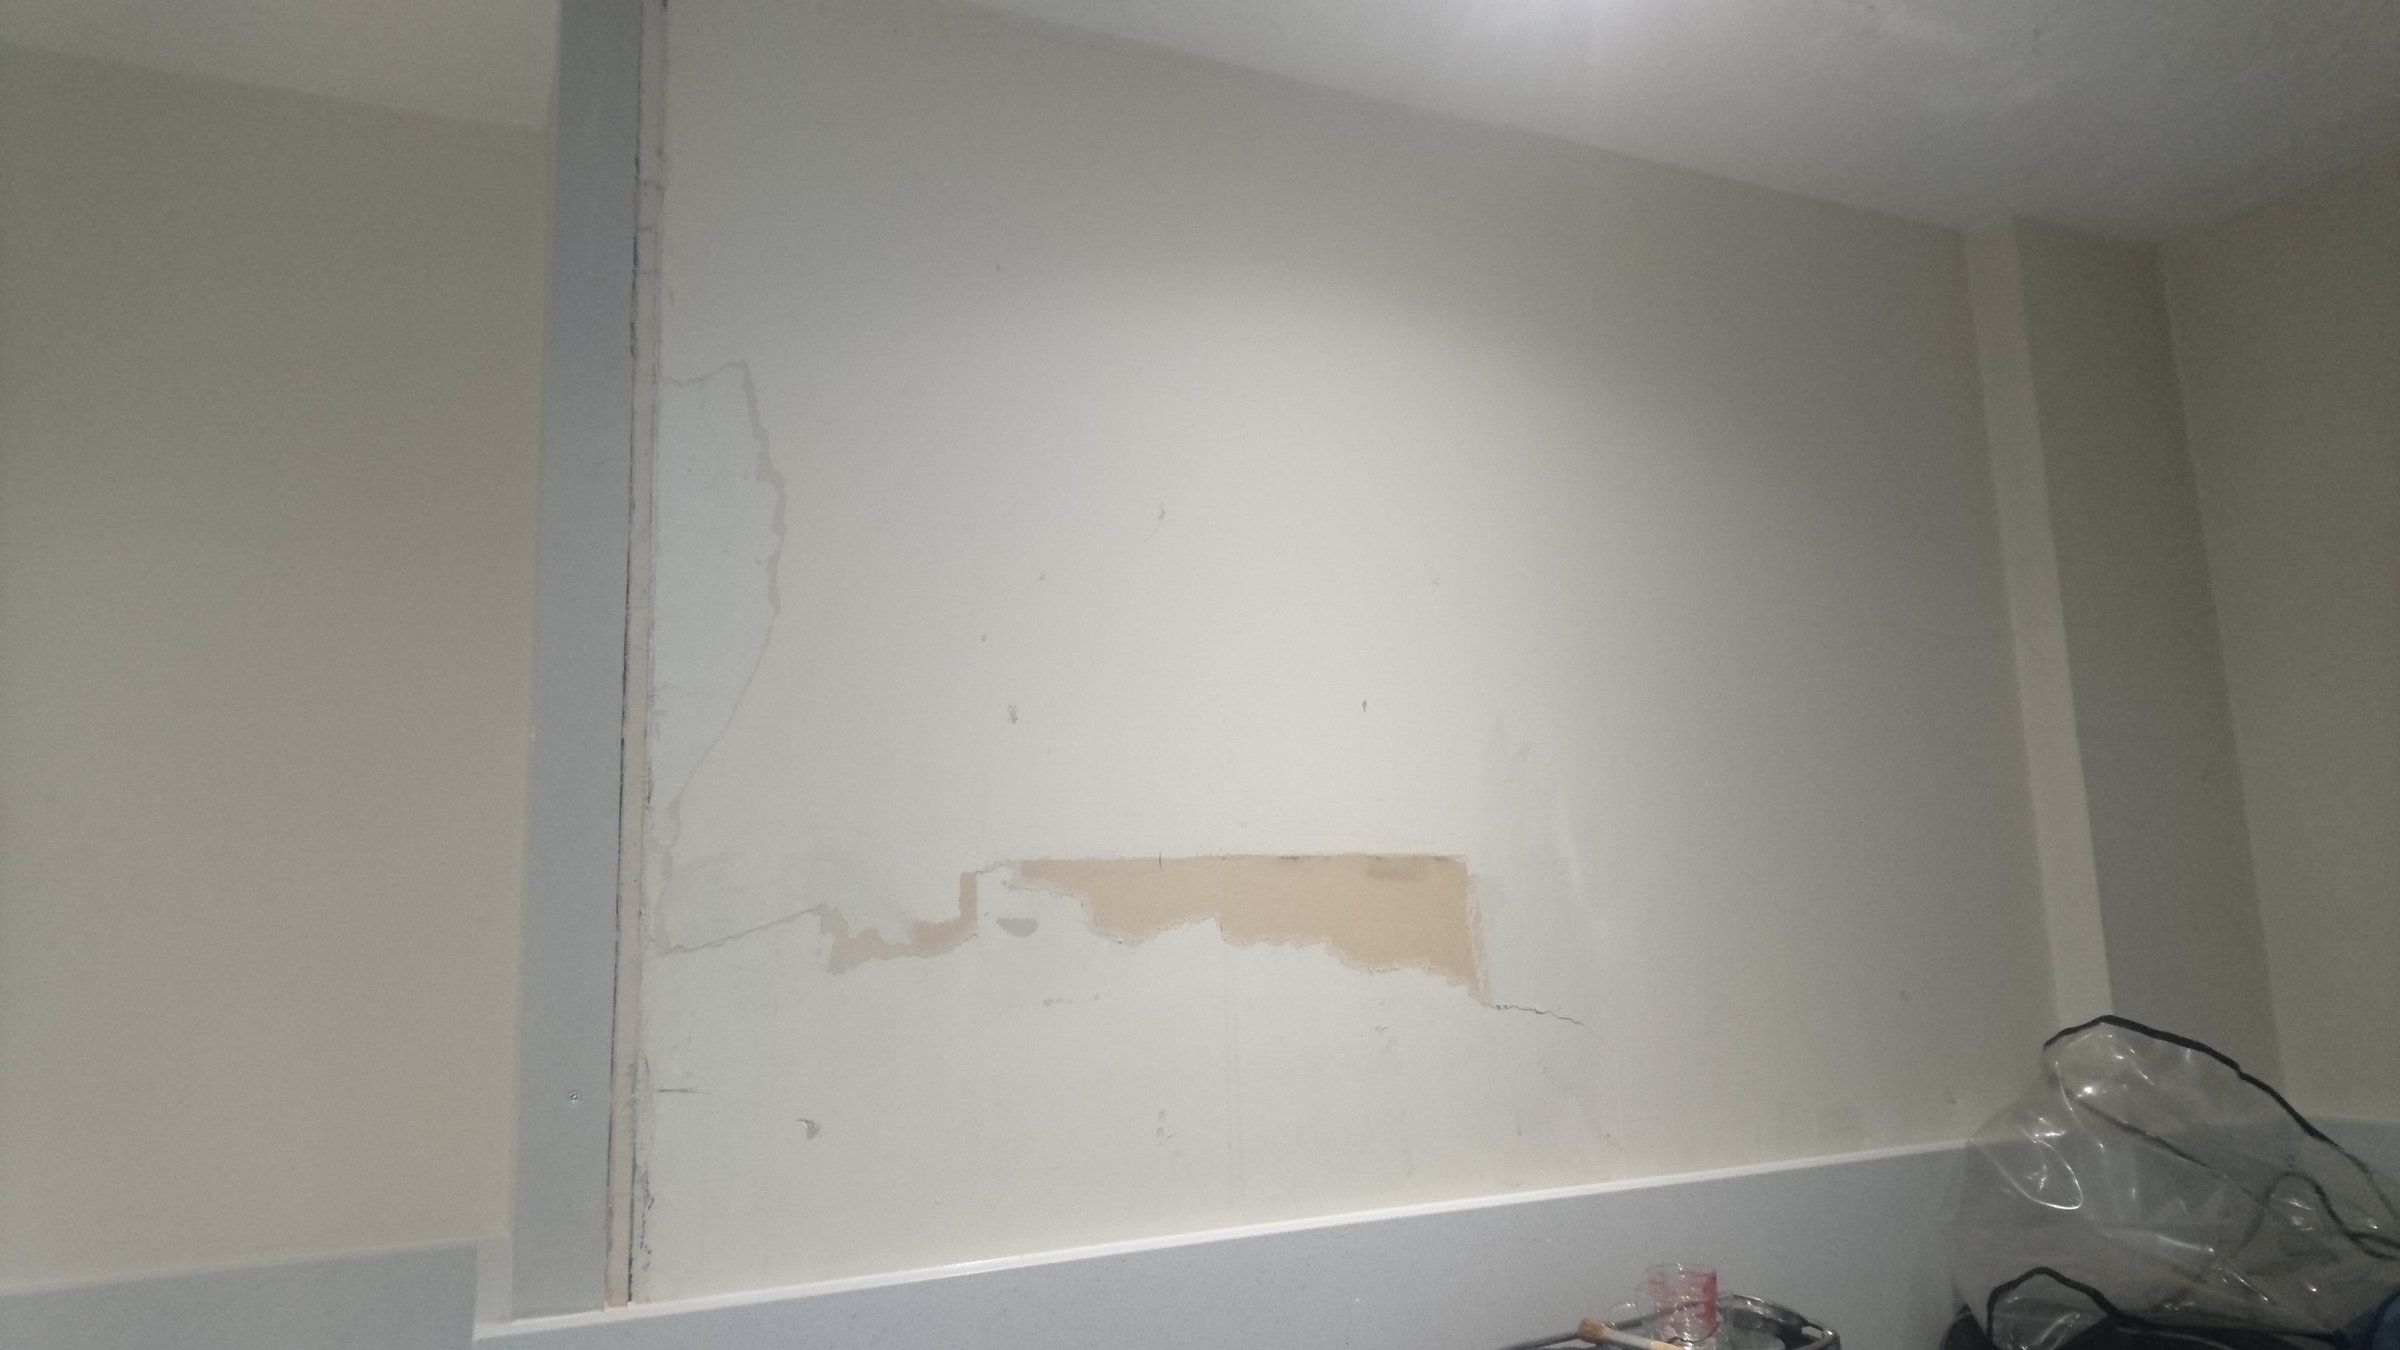 Wall prep before skimming | DIYnot Forums